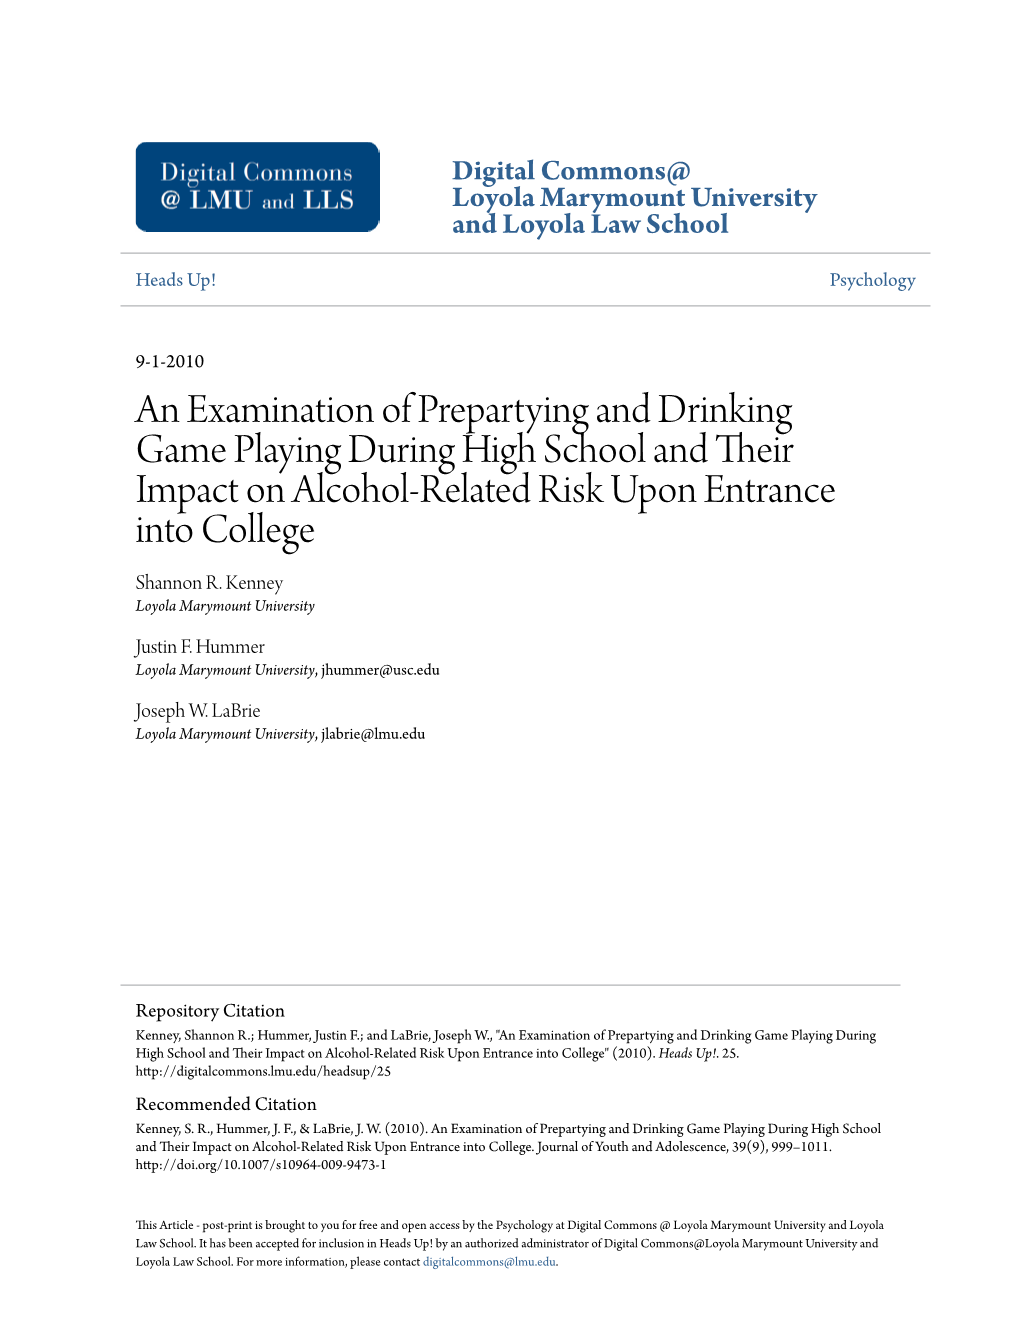 An Examination of Prepartying and Drinking Game Playing During High School and Their Impact on Alcohol-Related Risk Upon Entrance Into College Shannon R